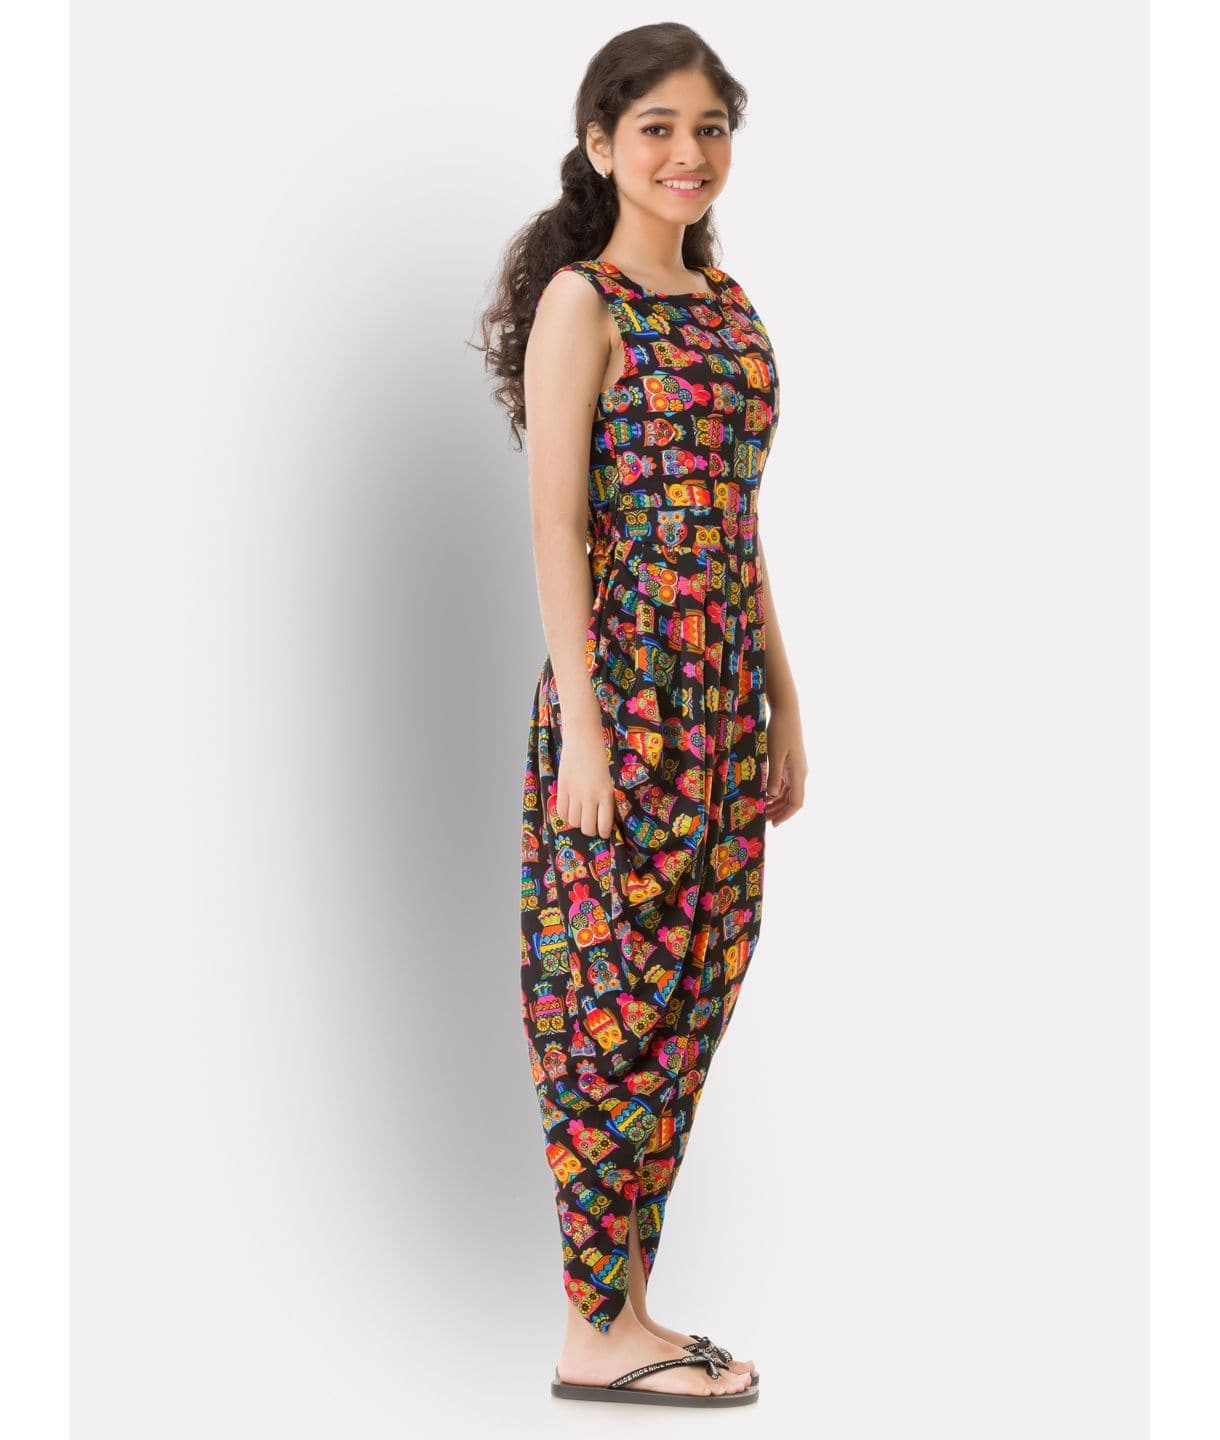 Jumpsuit For Girls  Buy Jumpsuit For Girls Online in India  Myntra